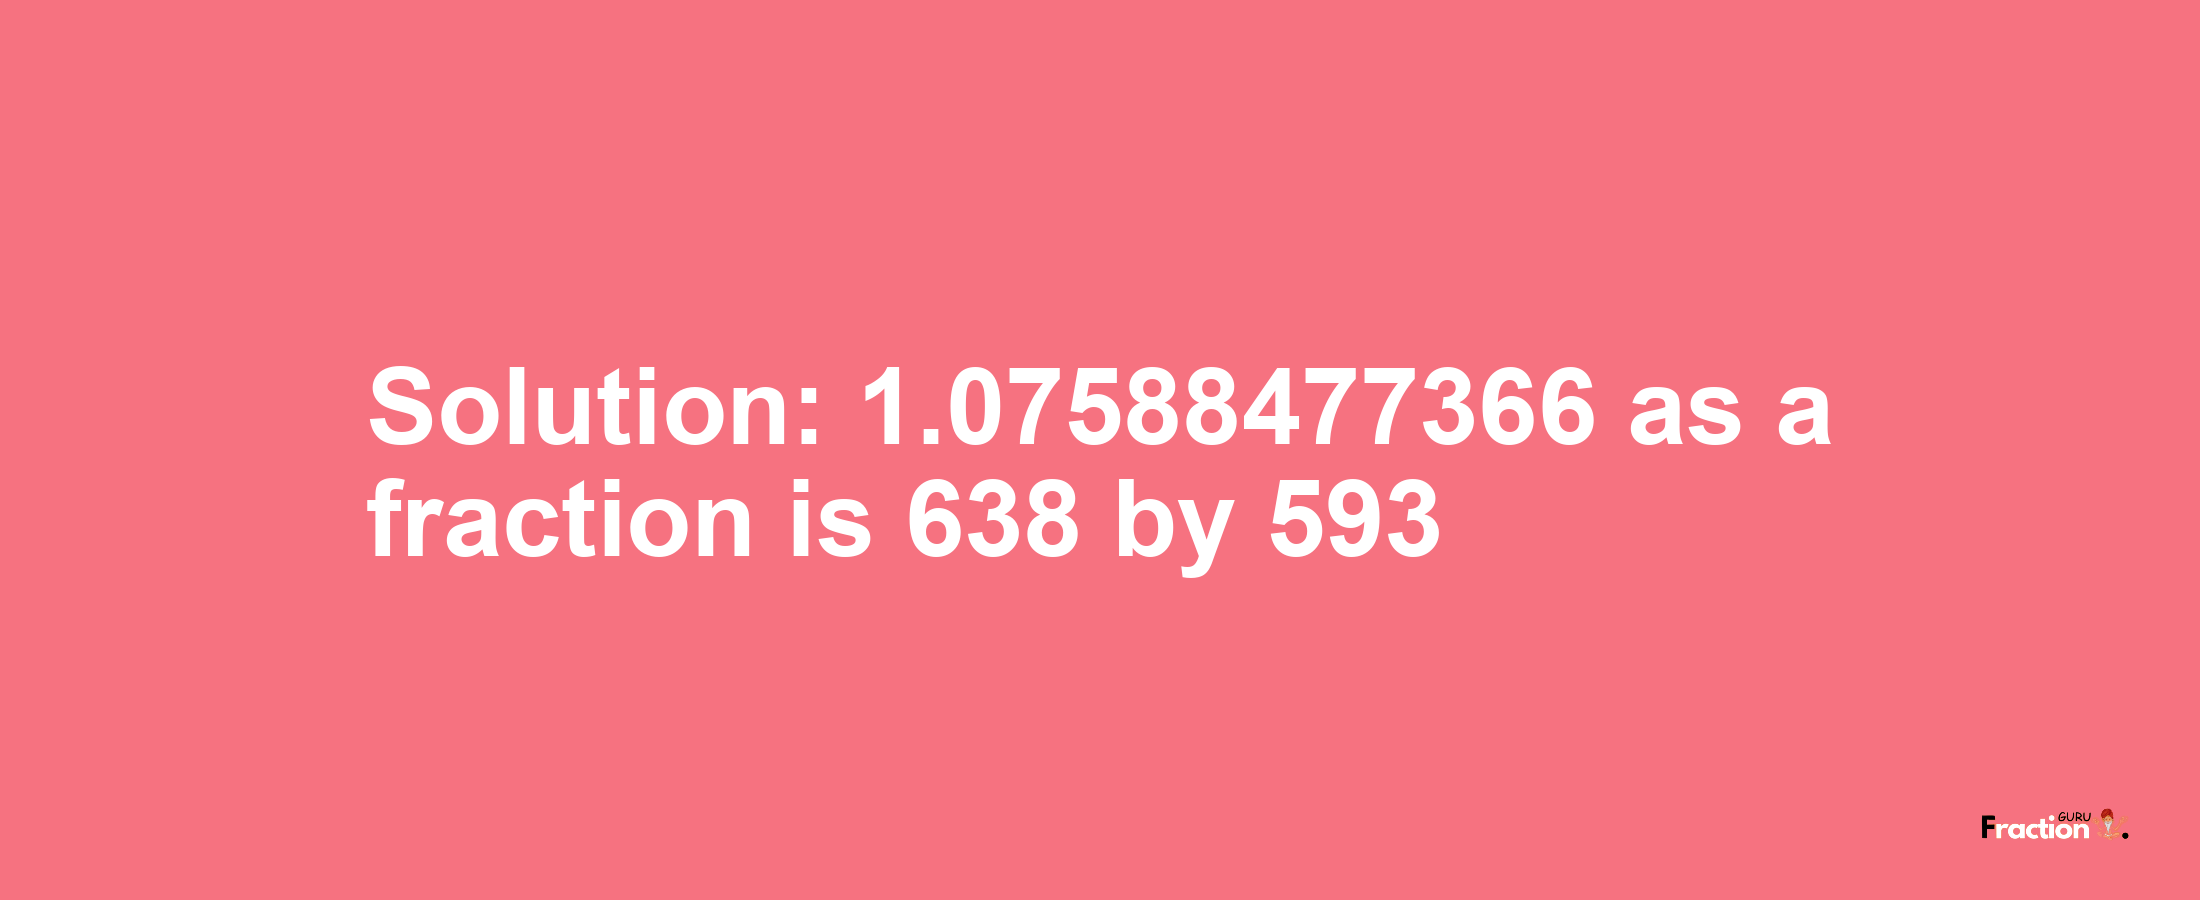 Solution:1.07588477366 as a fraction is 638/593